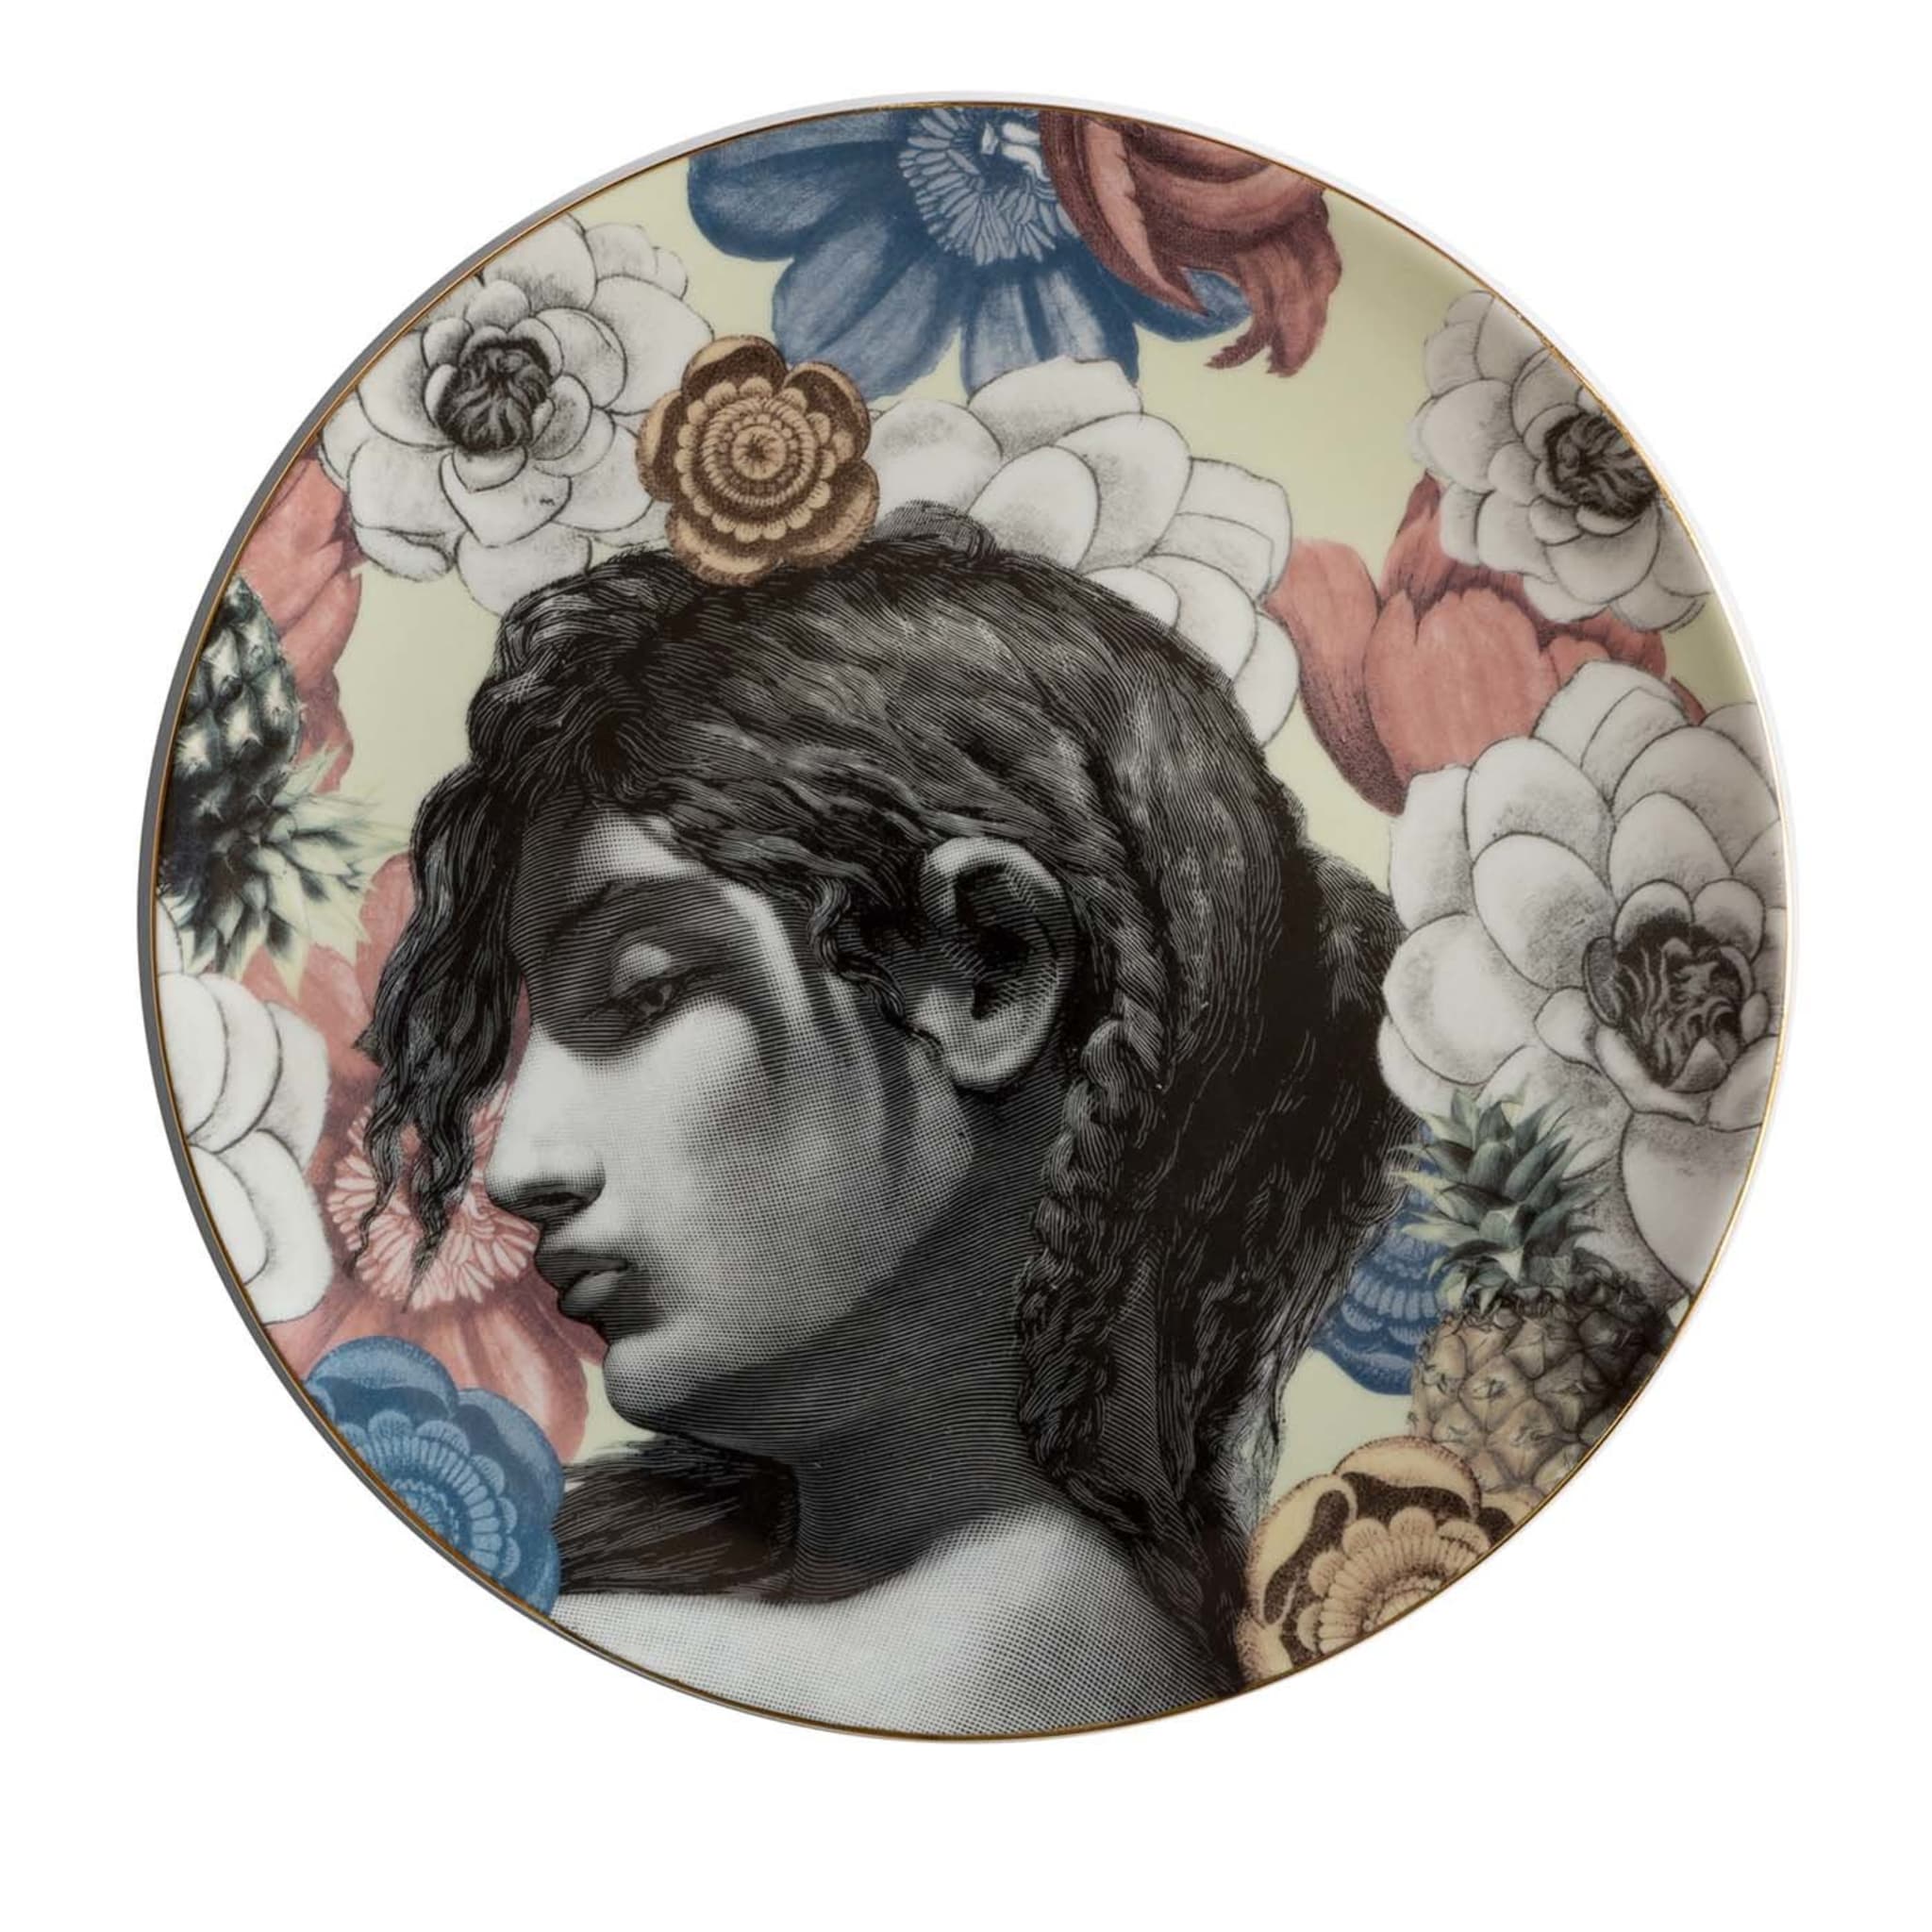 Cairo Porcelain Dinner Plate With A Woman'S Face And Flowers #3 - Main view